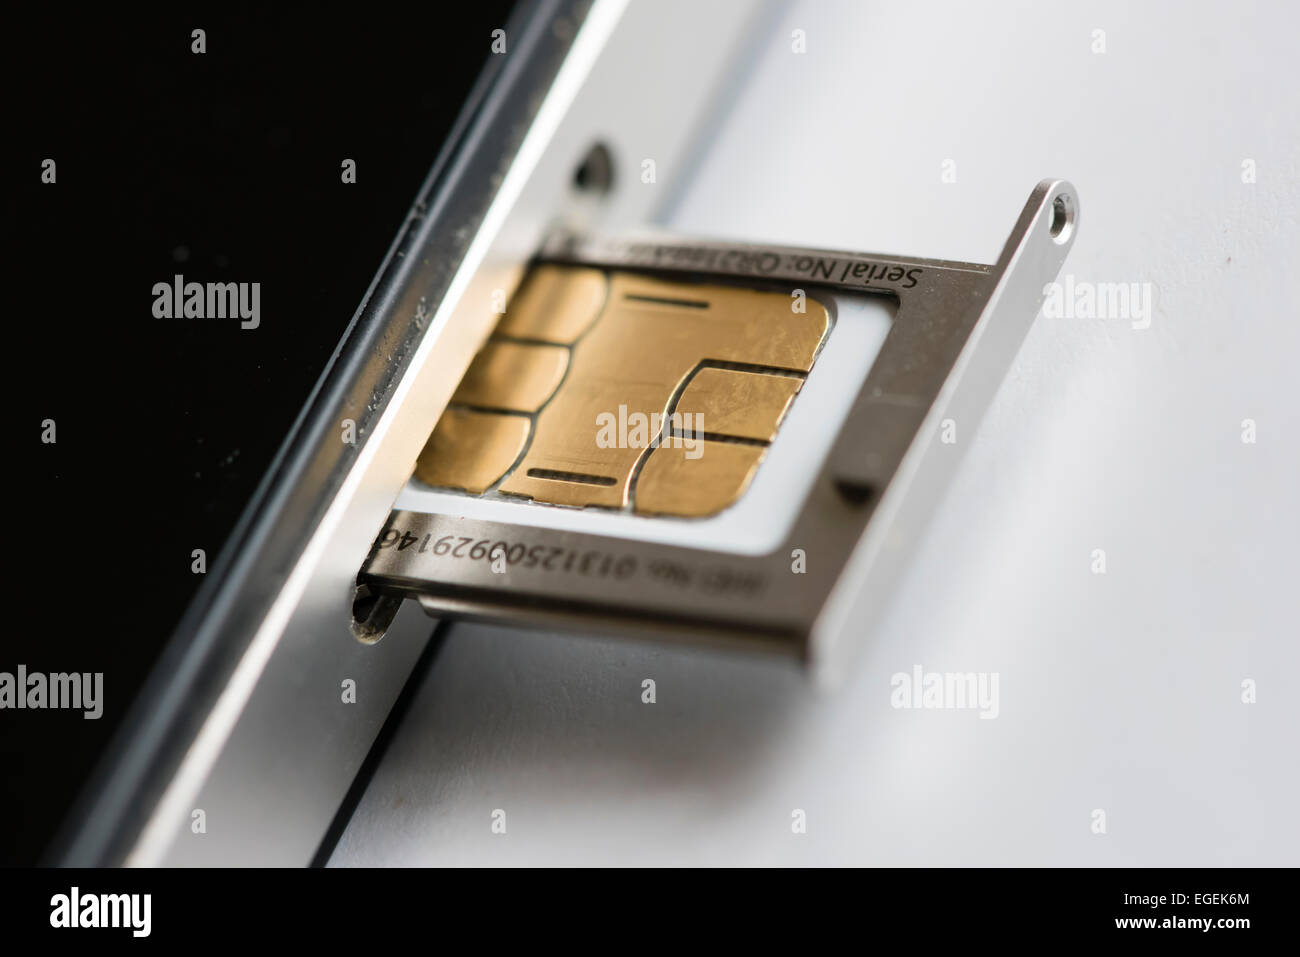 A Micro Sim Card Is Inserted Into An Apple Iphone 4 Smartphone